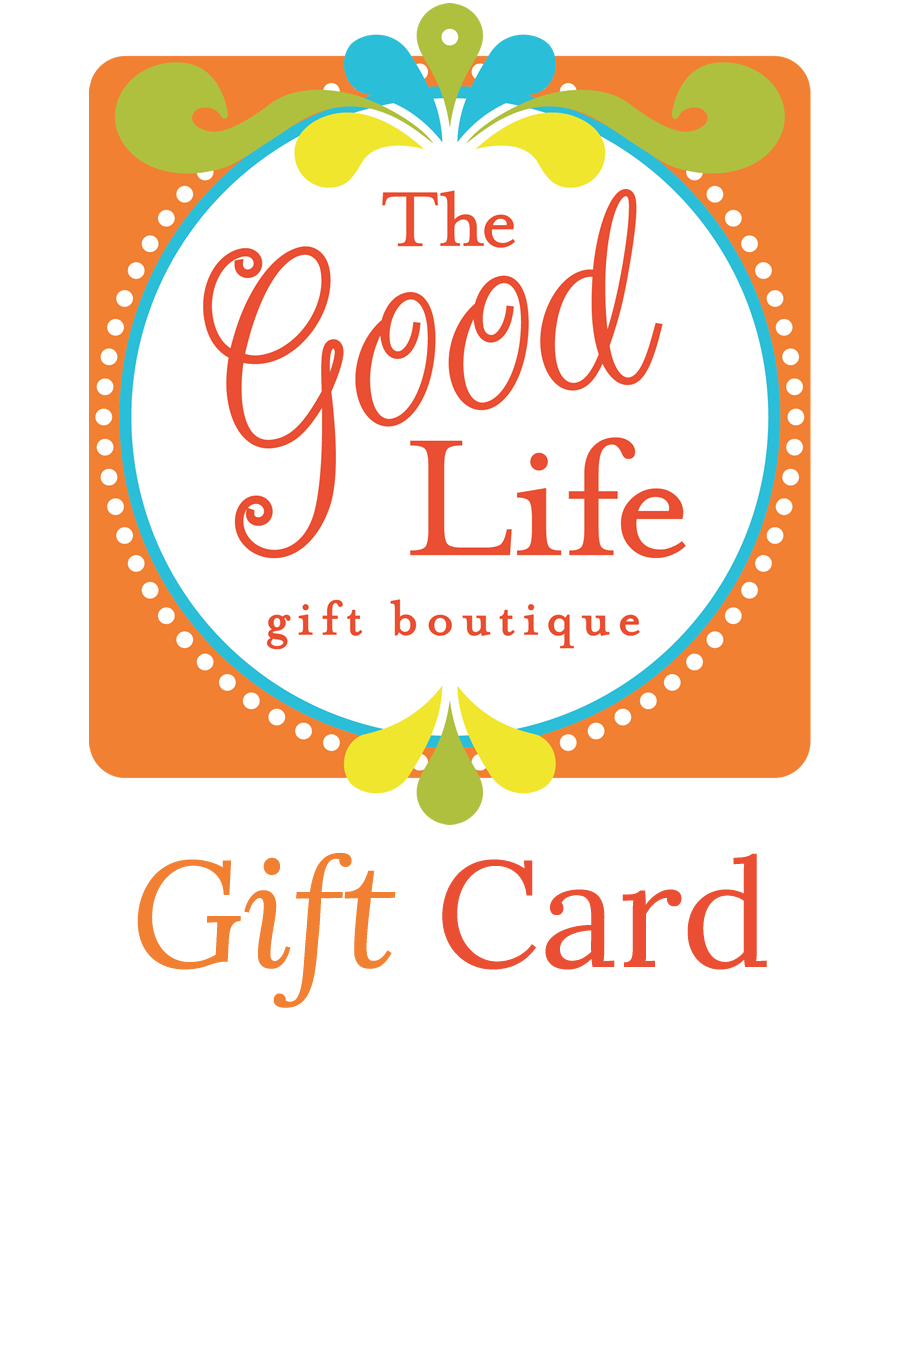 The Good Life Boutique Gift Cards available at The Good Life Boutique